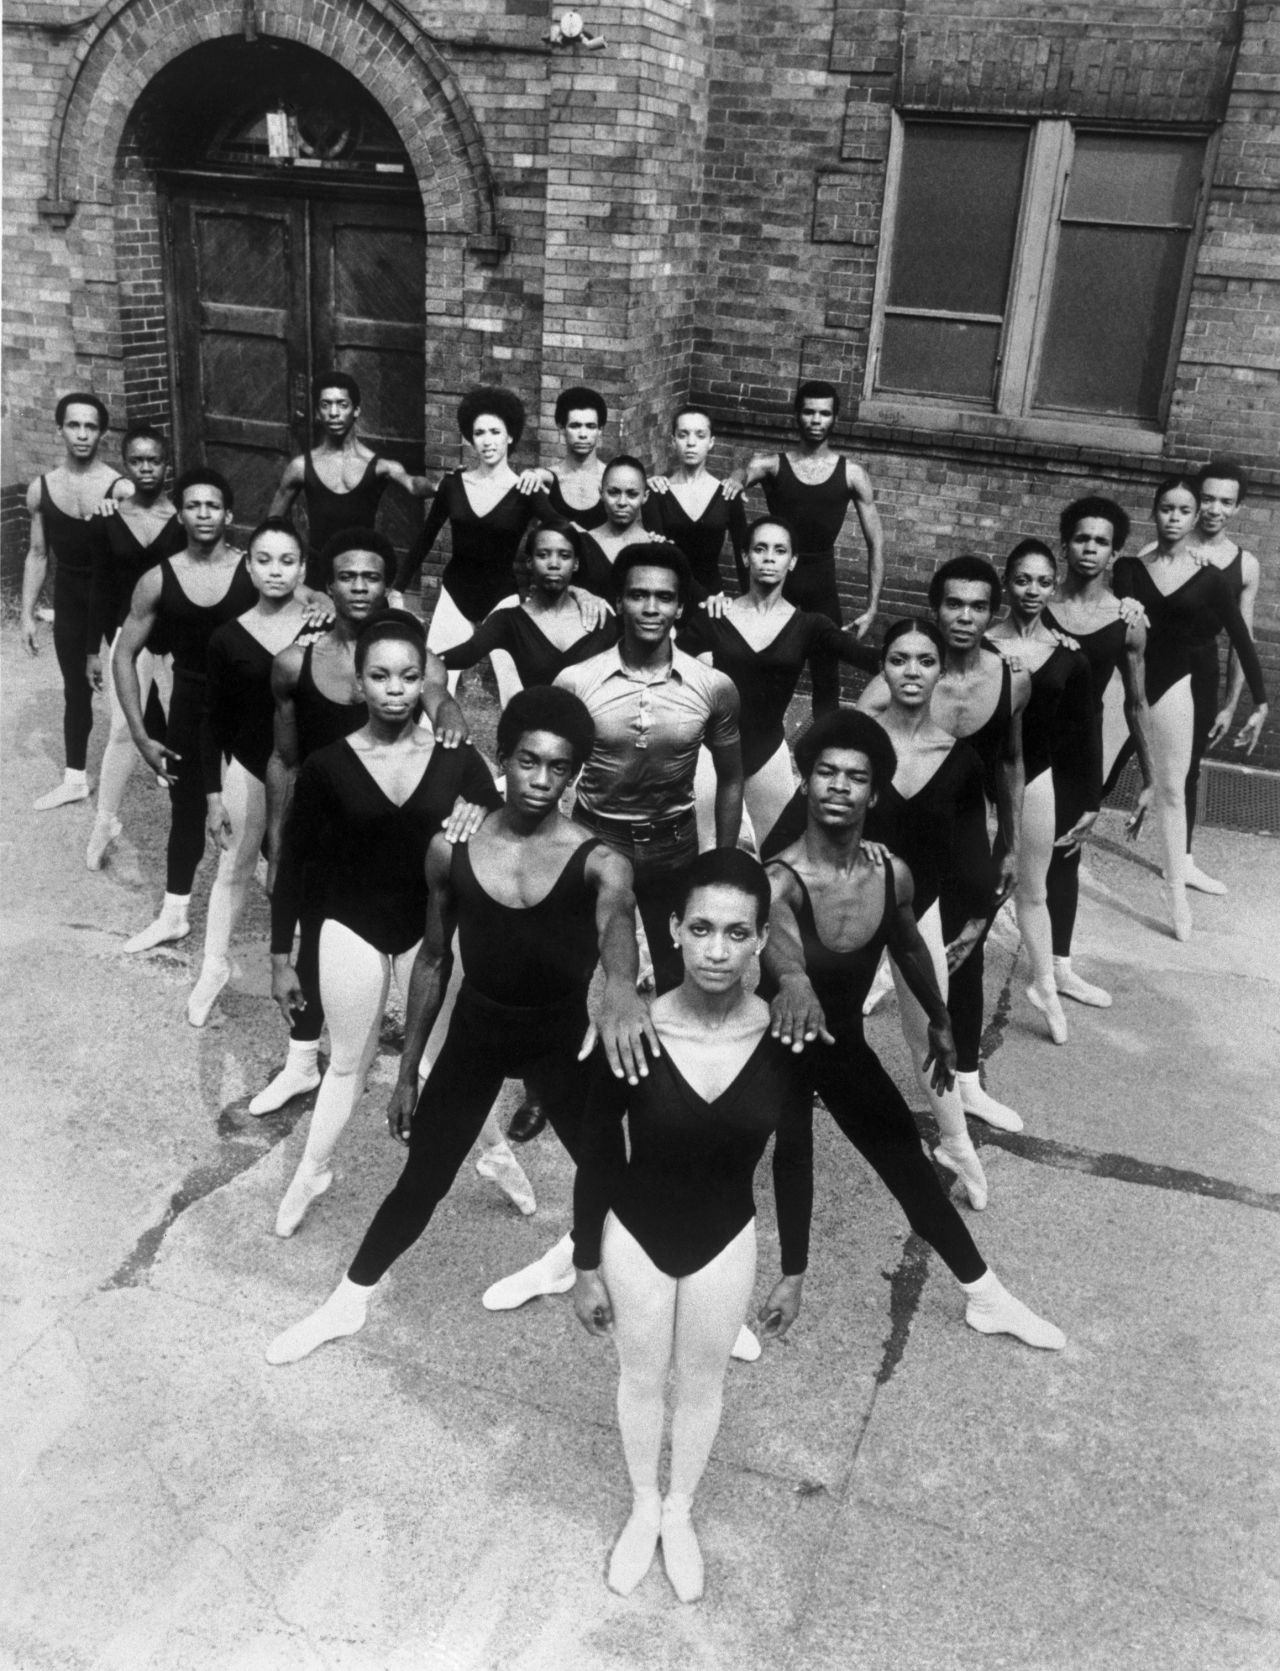 Mitchell stands in the middle of dancers of the Black Ballet Company in 1973. Revered for his artistic accomplishments, Mitchell was driven by the belief that dance can effect social change. 